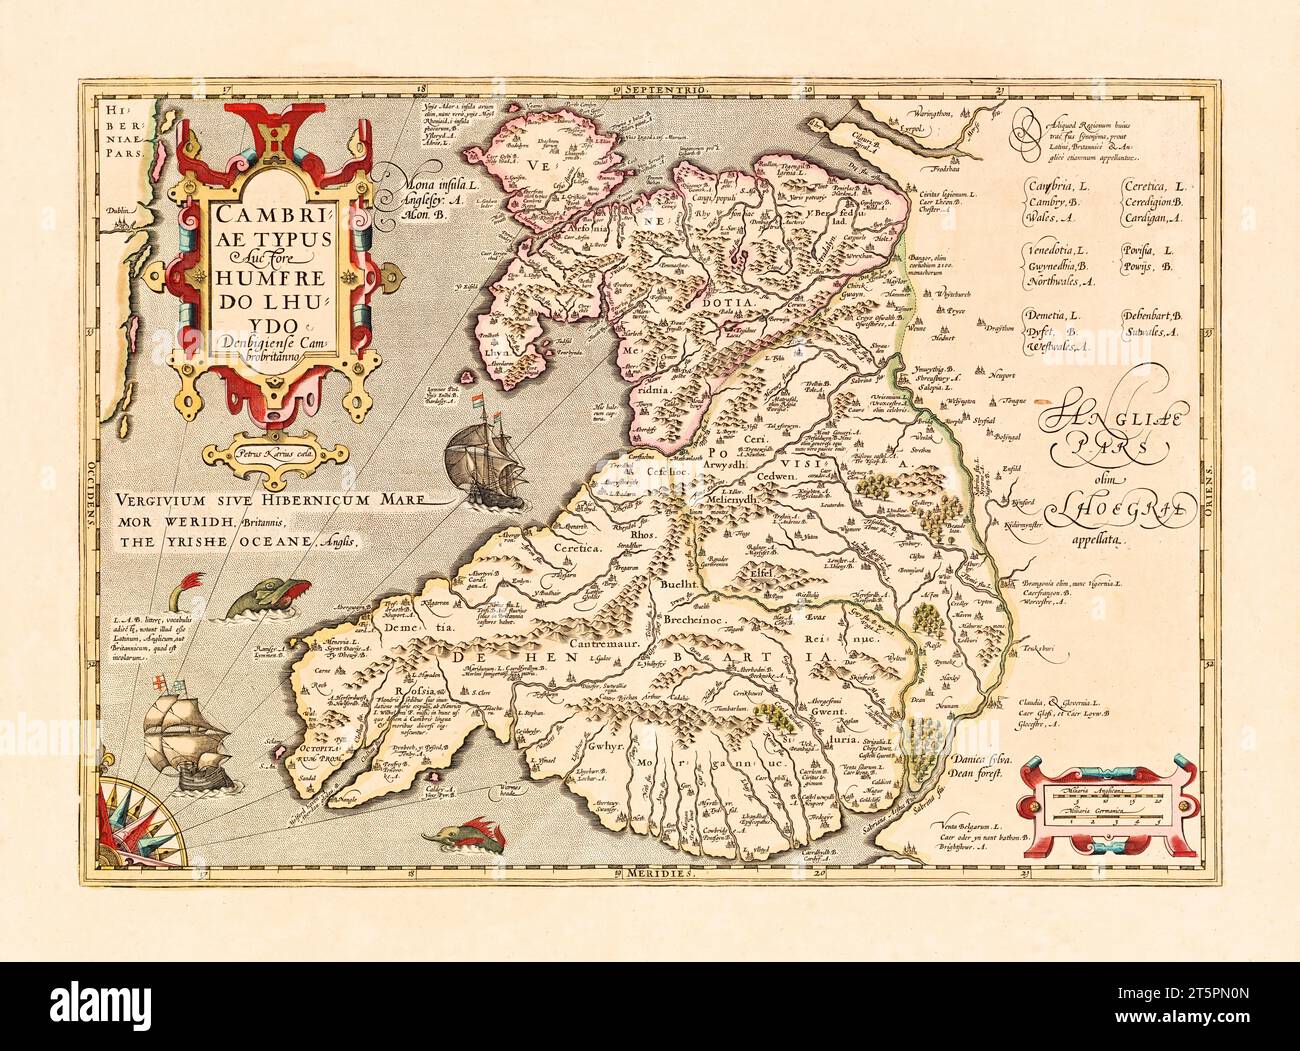 Old map of Cumbria, United Kingdom. By Hondius, publ. In 1633 Stock Photo